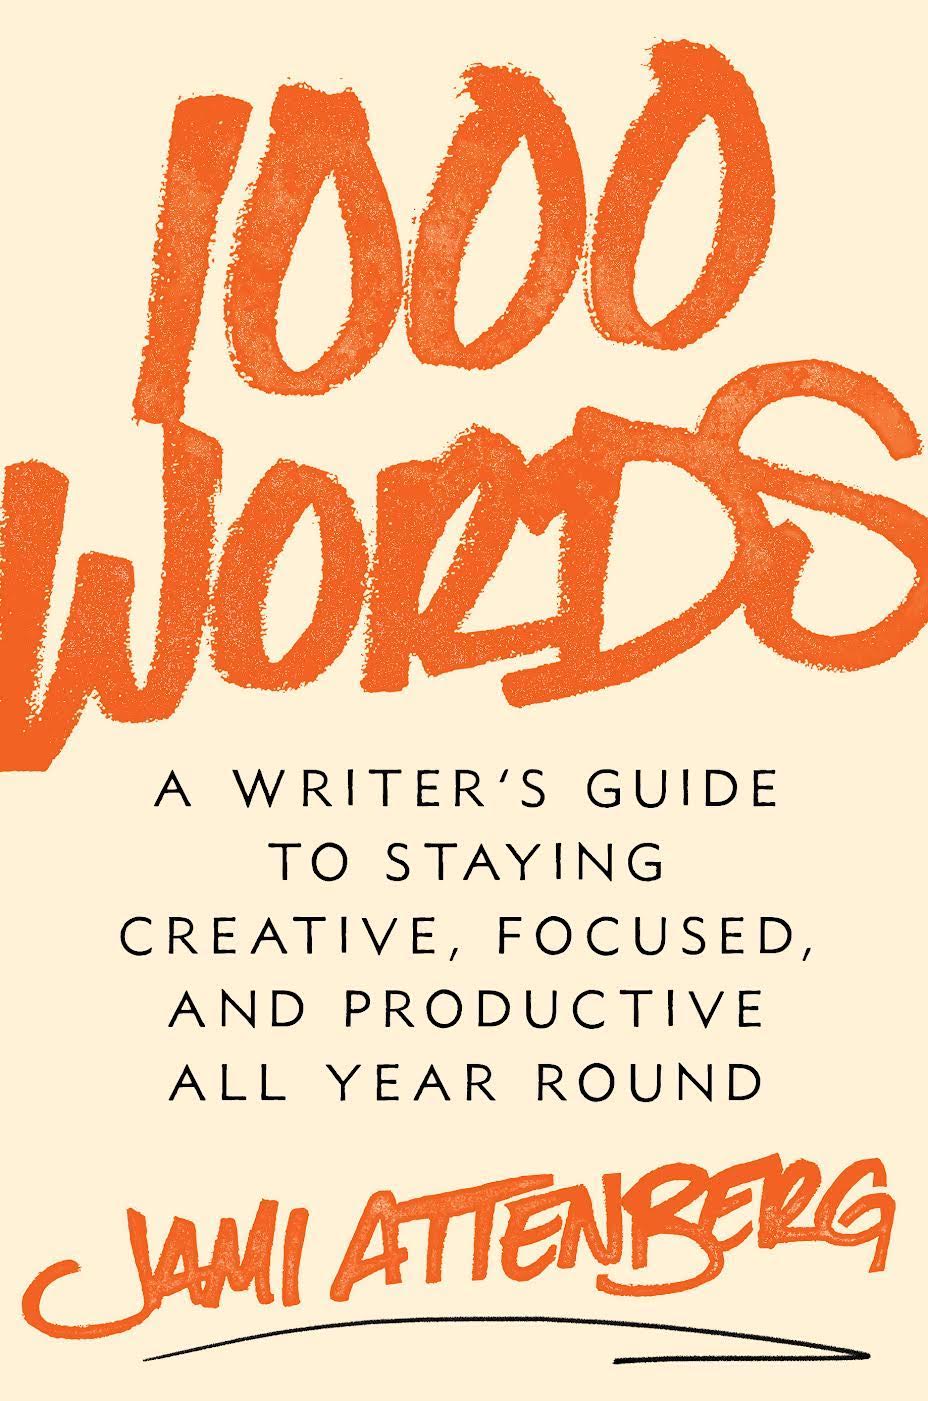 Book Cover Image of “1000 Words: A Writer’s Guide to Staying Creative, Focused, and Productive All Year Round”